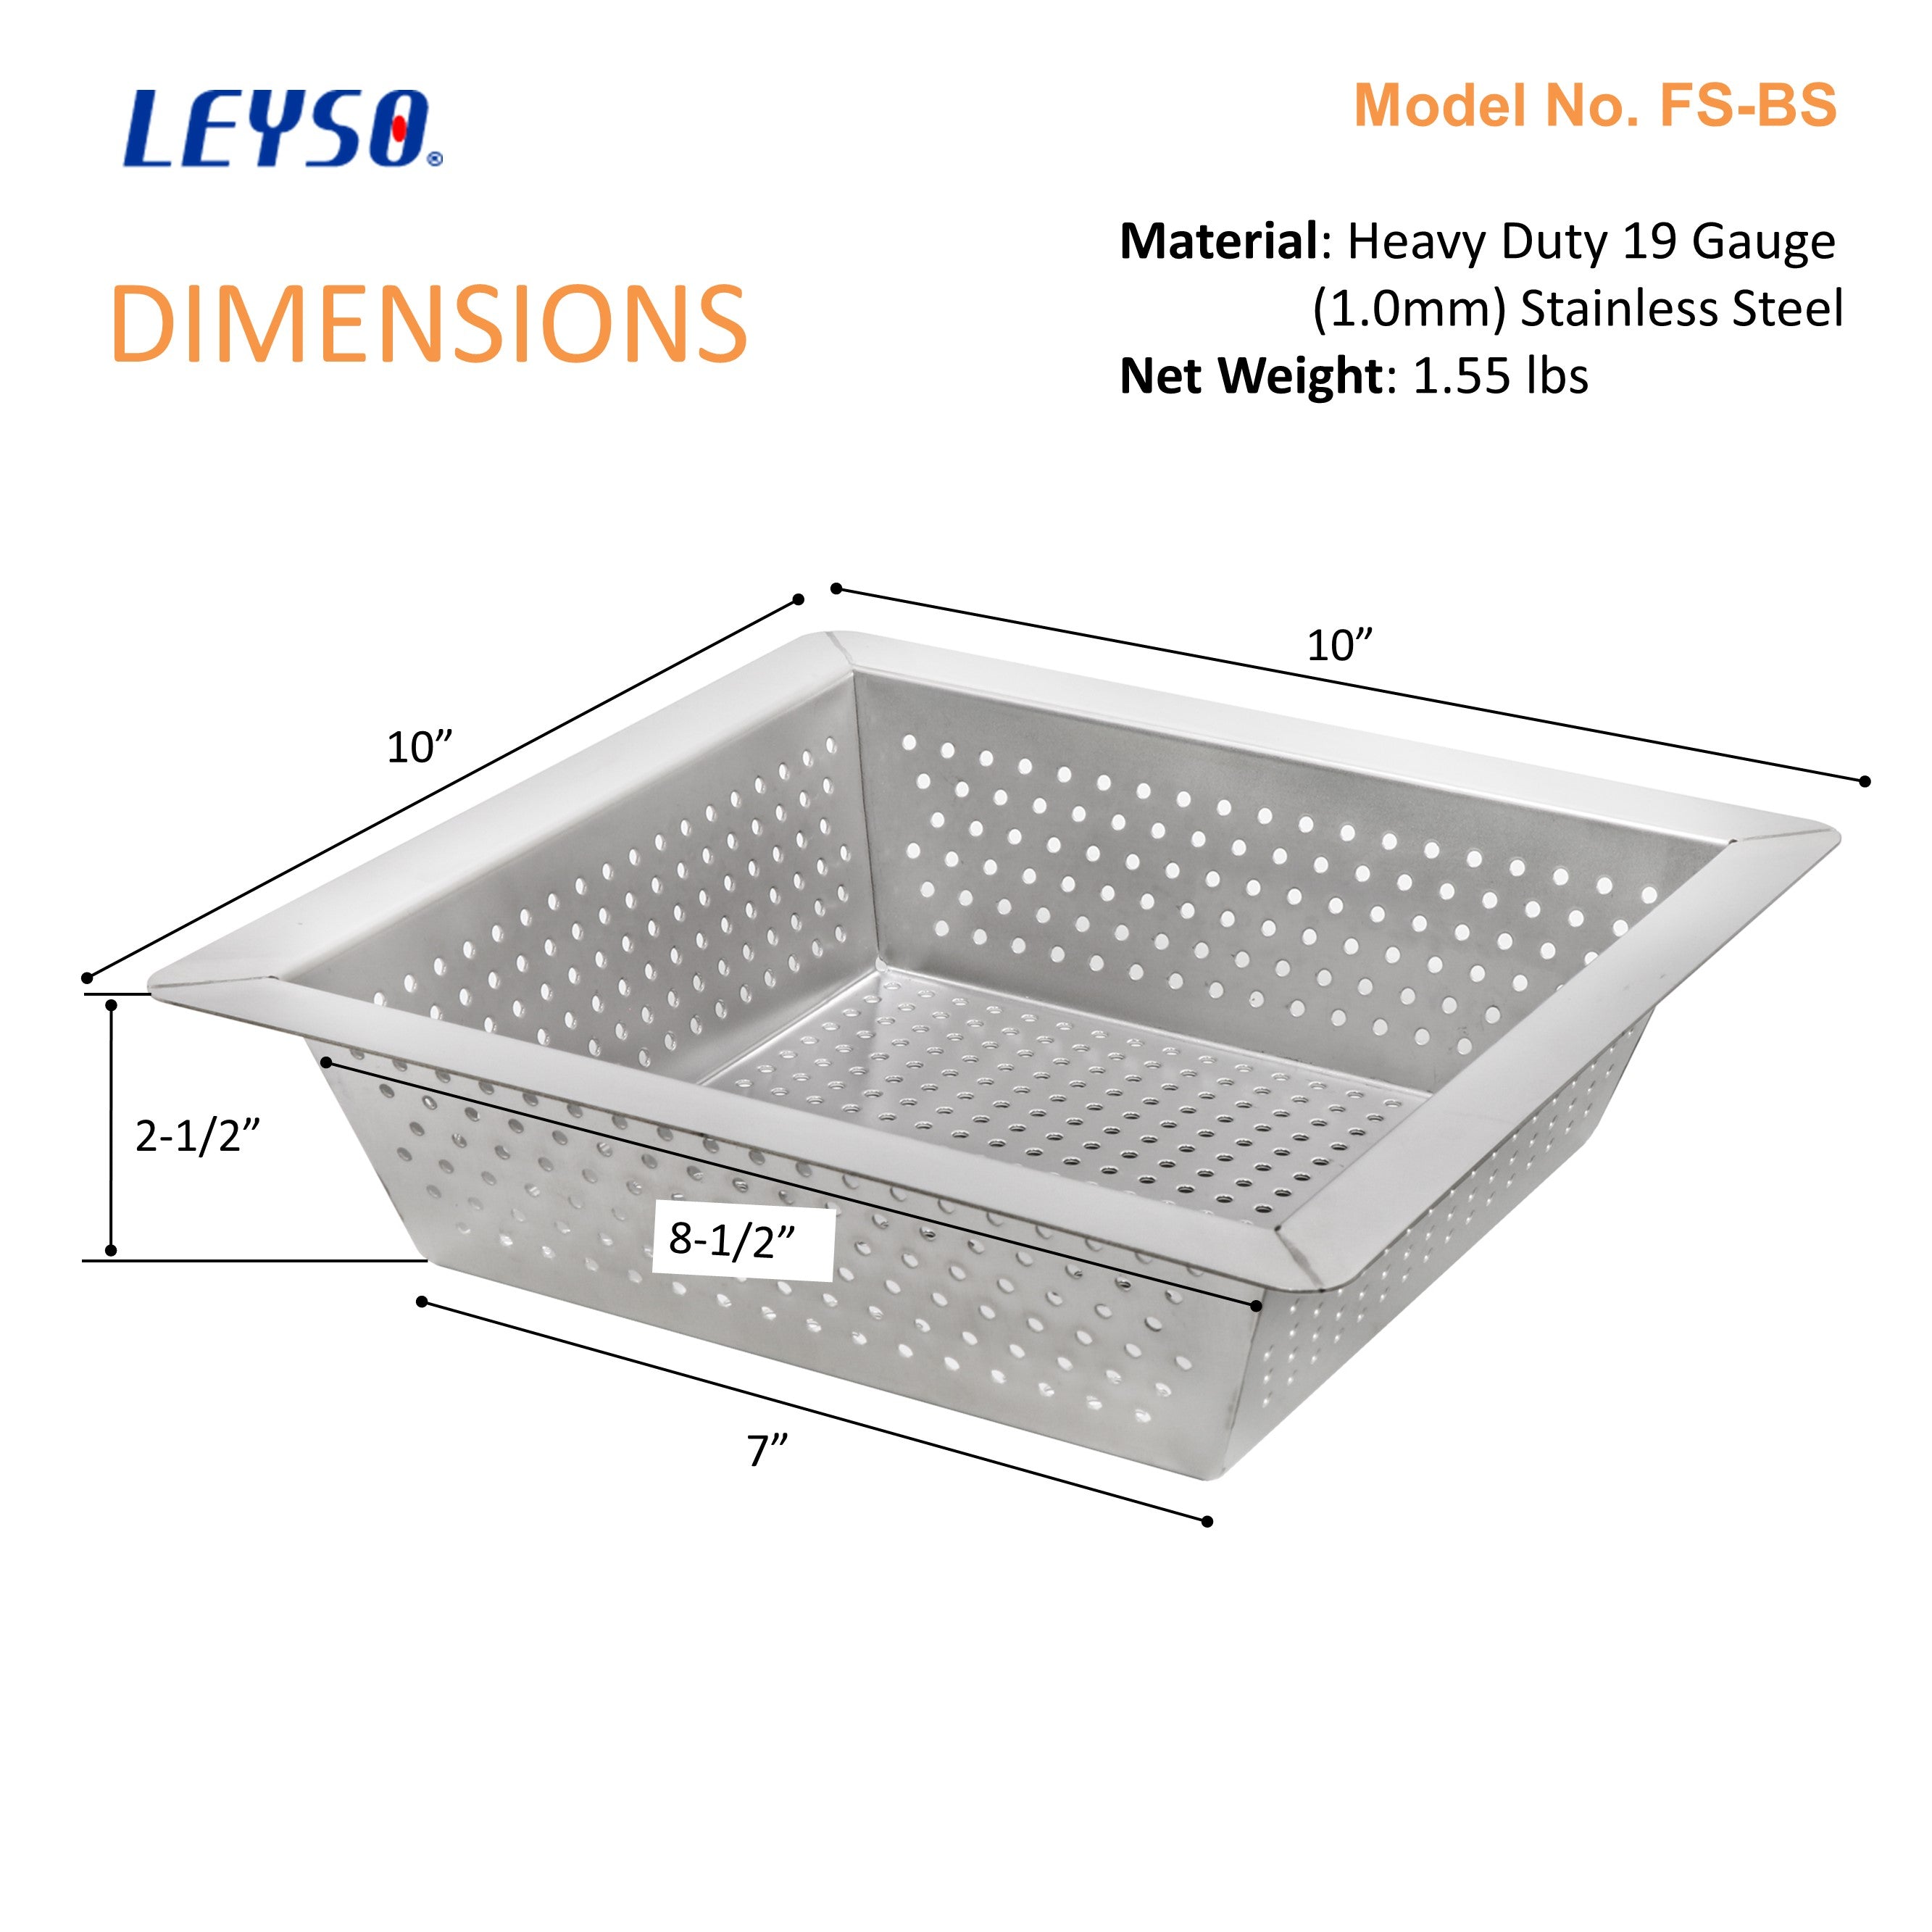 Leyso Stainless Steel Floor Sink Top Hang Basket Strainer Sink Drain Cover 10” x 10” x 2-1/2” for Kitchen, Restaurant, Bar, Buffet